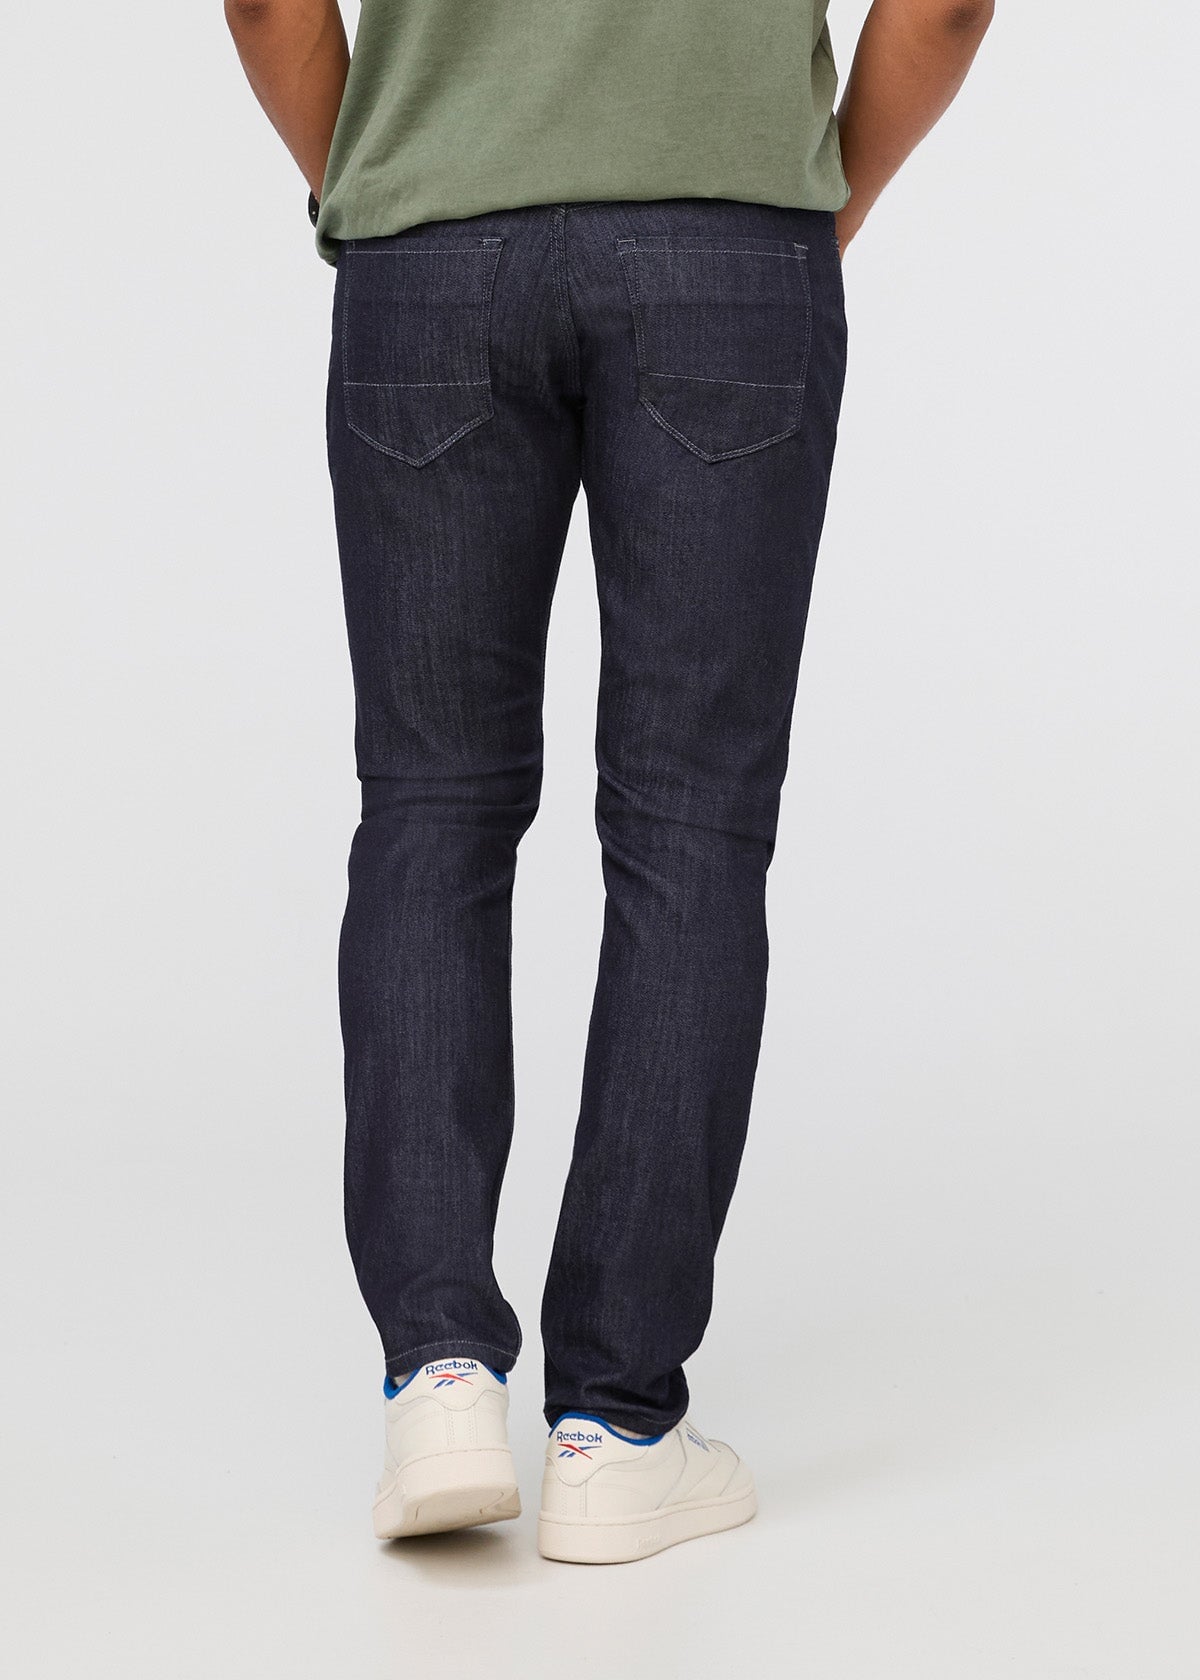 DUER - Men's Performance Denim Athletic Straight - Galactic | Massey's  Outfitters